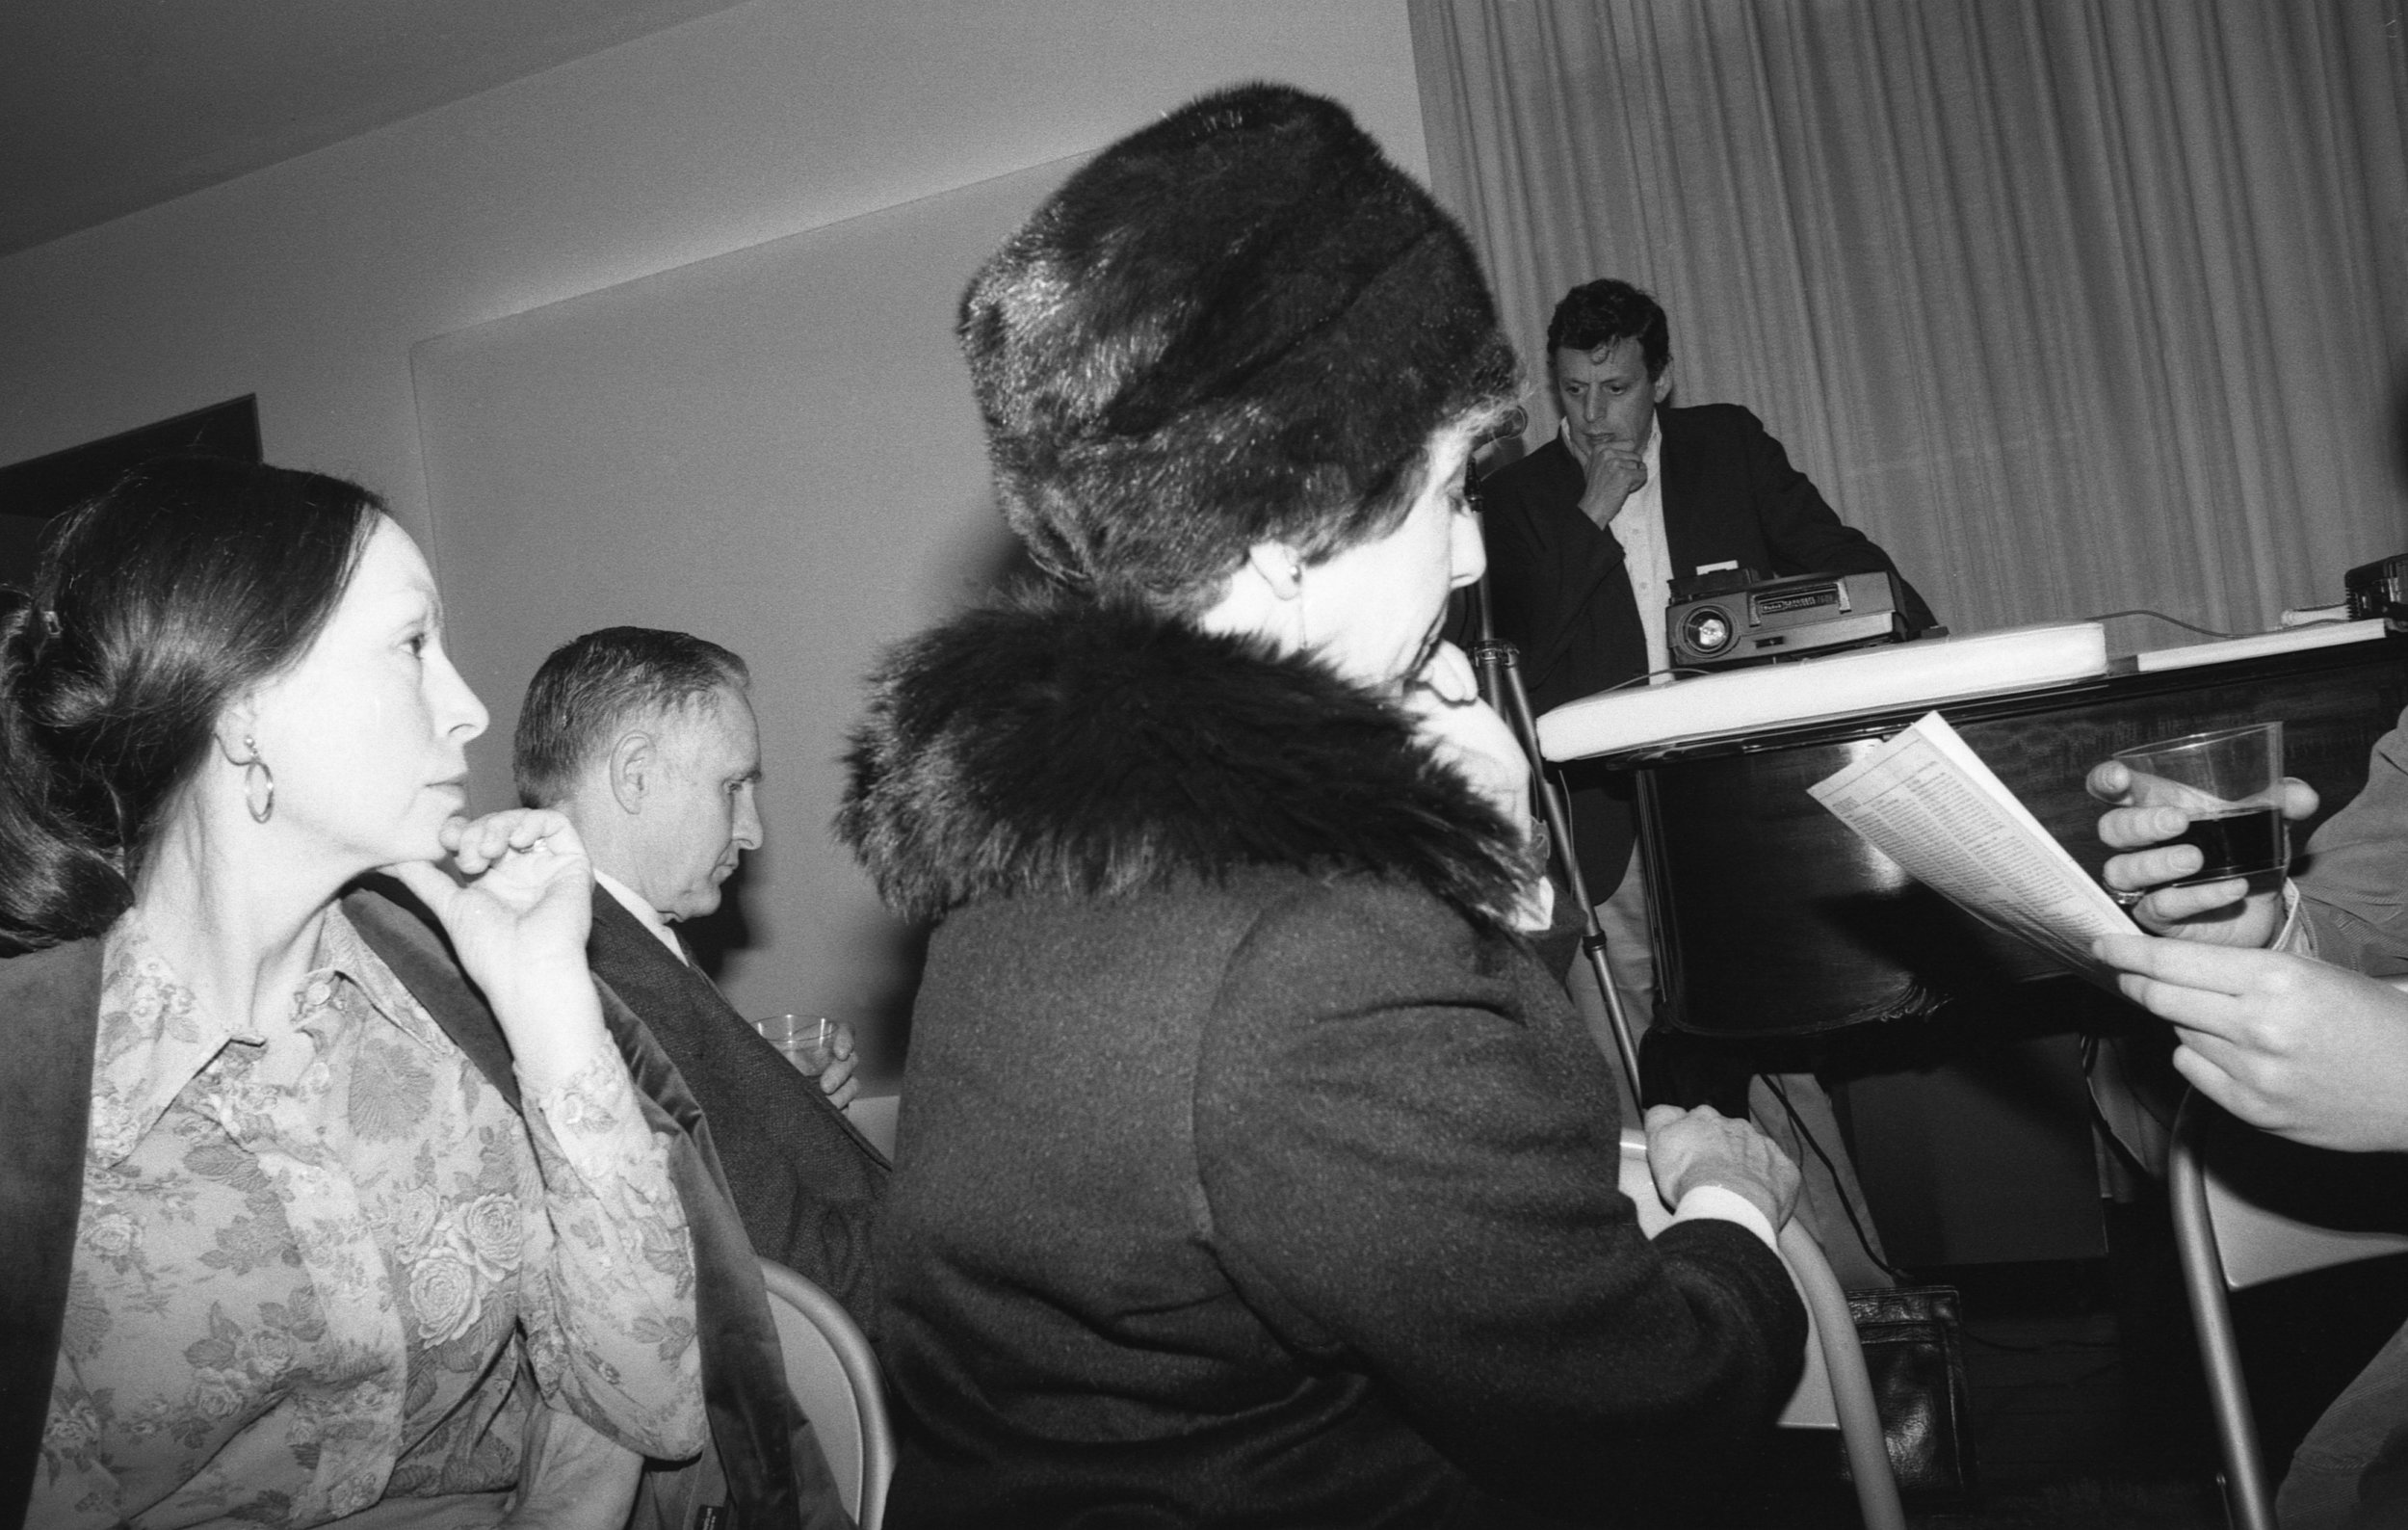 Philip Glass making a presentation at salon given by Betty Freeman, Los Angeles, 1981.